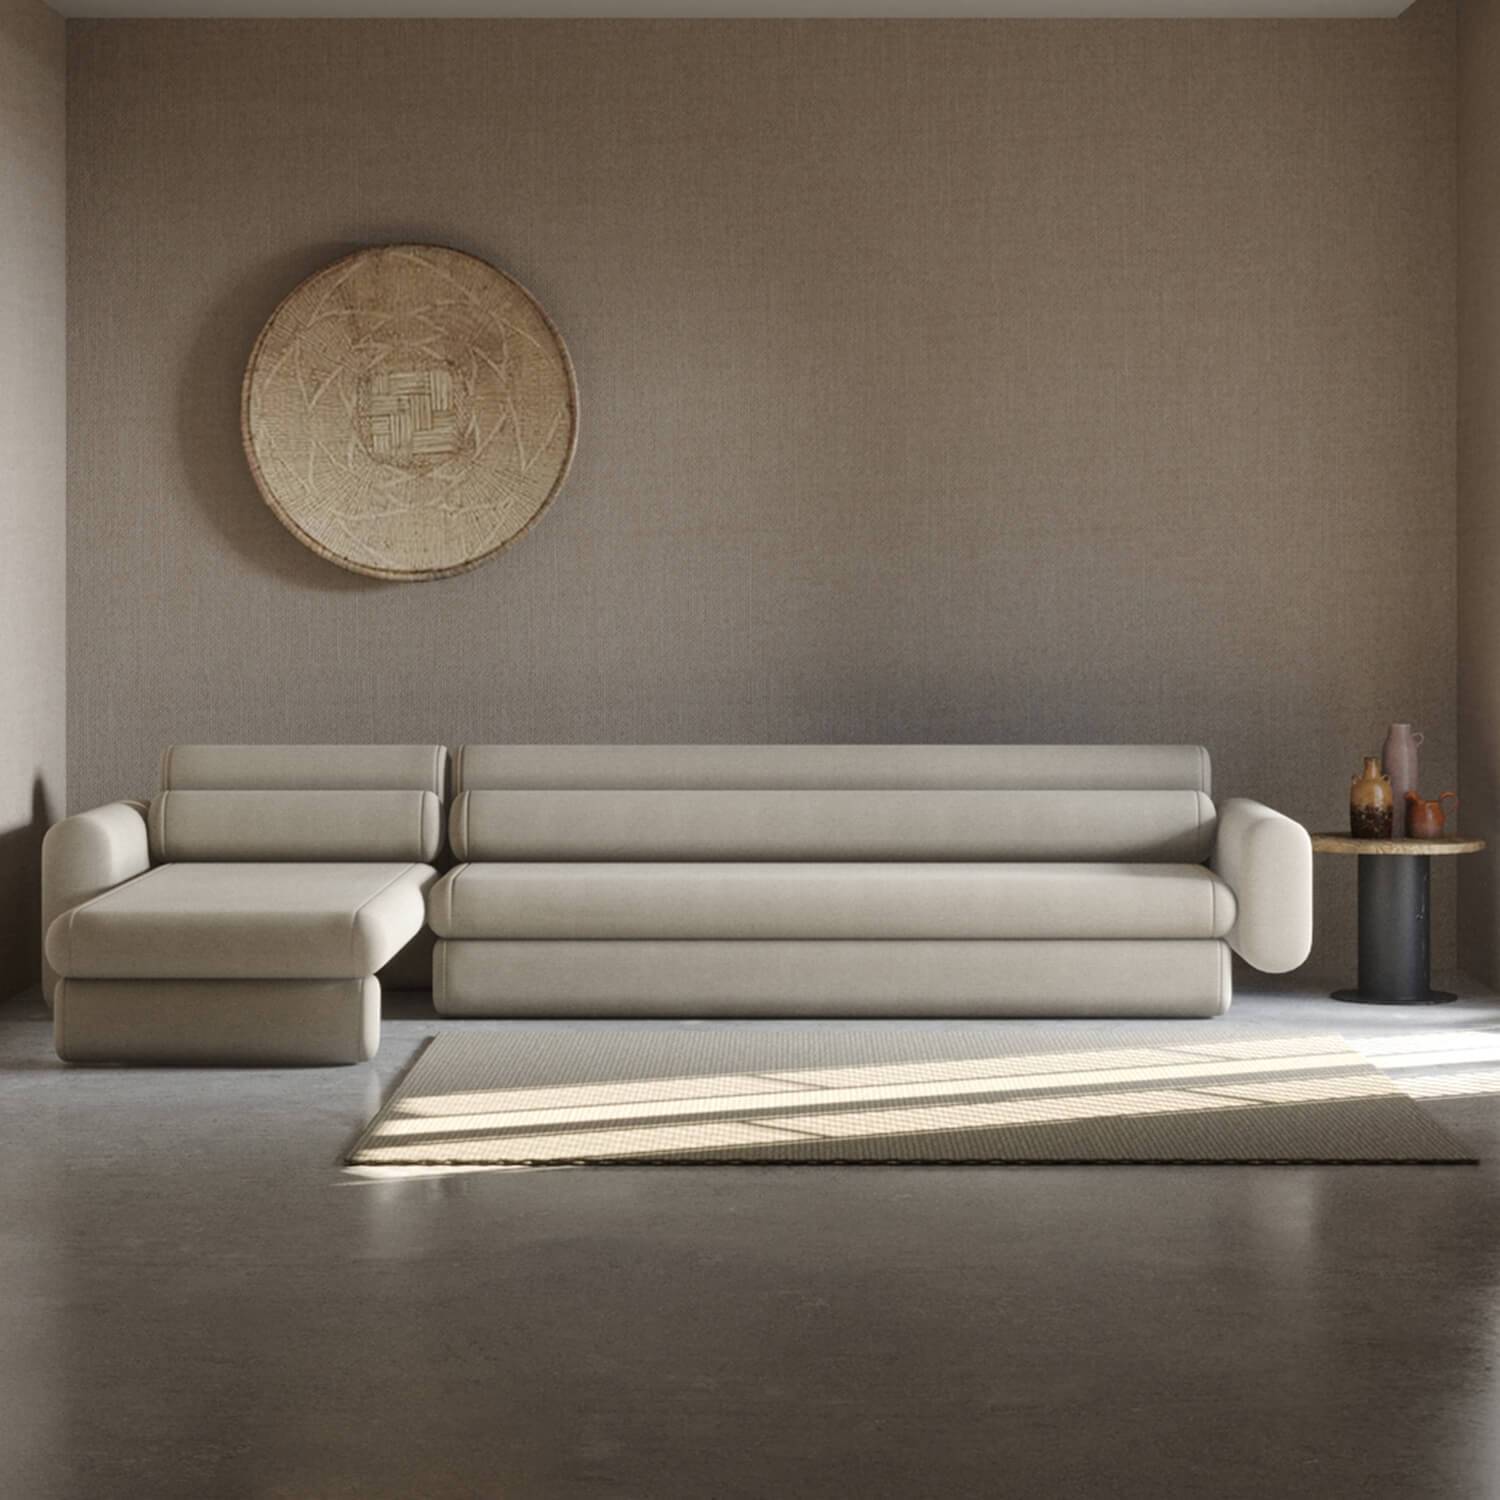 https://cozyhomedubai.com/wp-content/uploads/2022/12/otto-l-shape-couch-with-day-bed.jpg